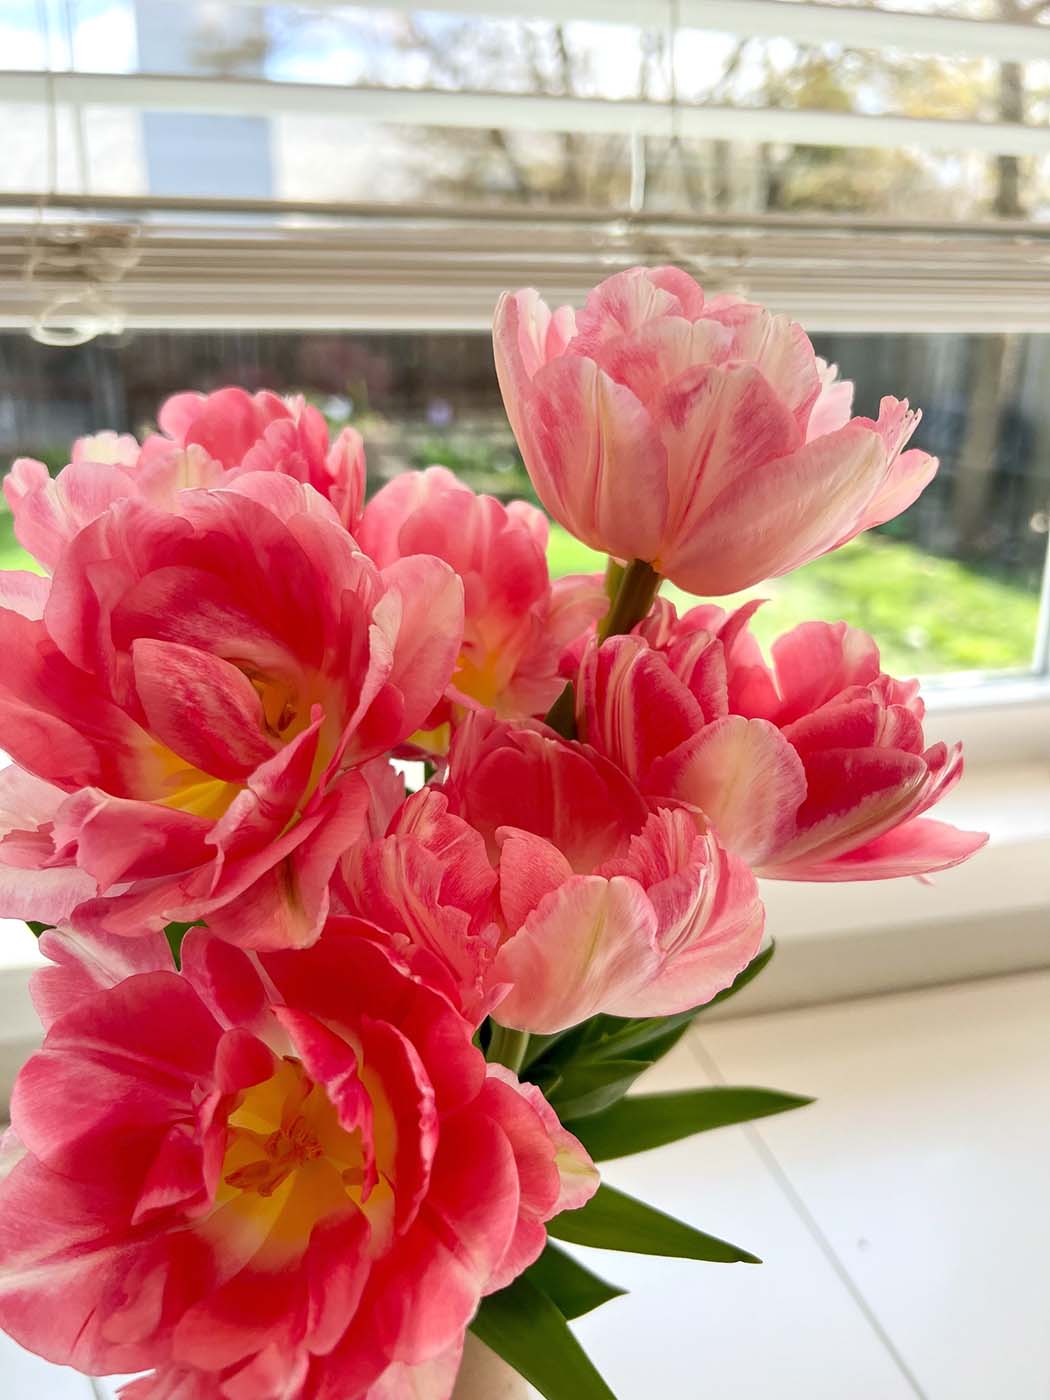 Pink tulips grown by Bloom Sacramento are in a vase in front of window